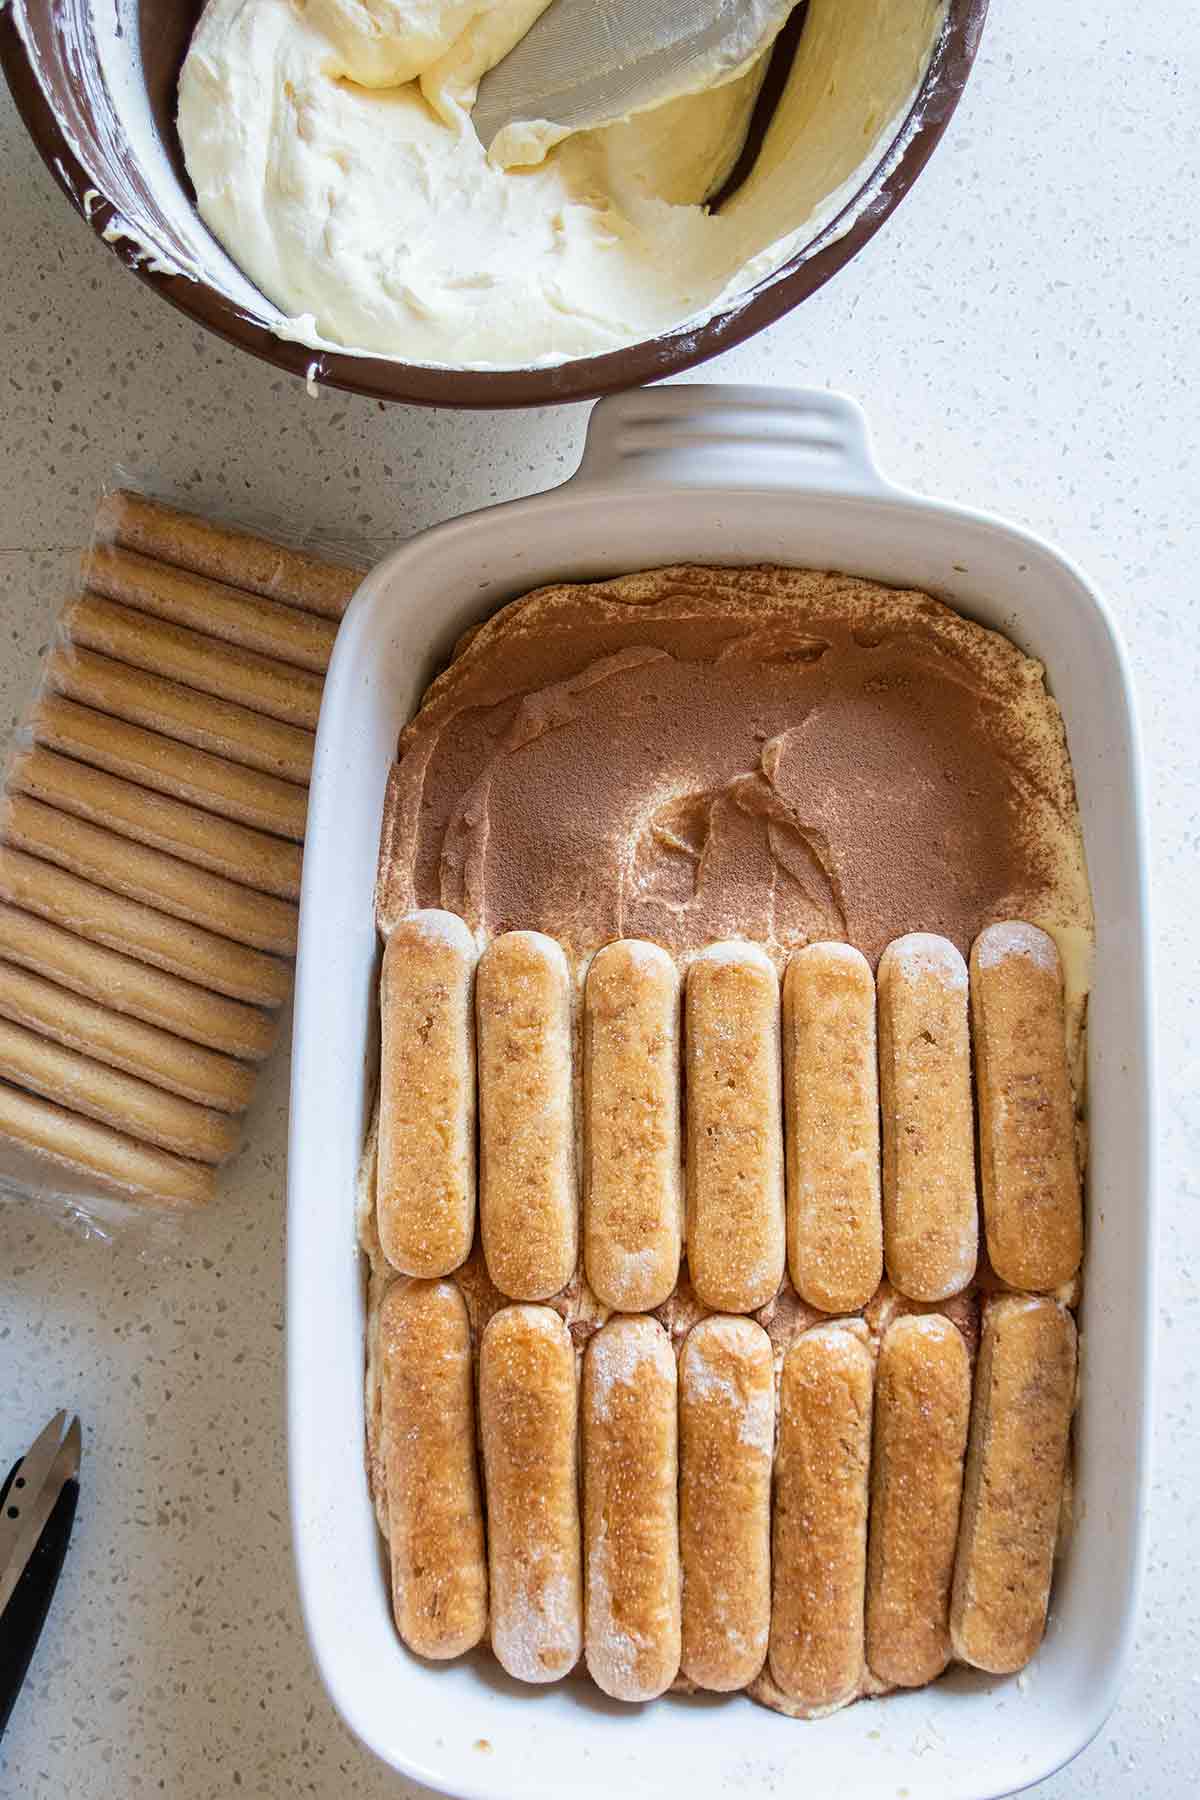 showing layers of tiramisu with lady fingers and cream layers in a dish